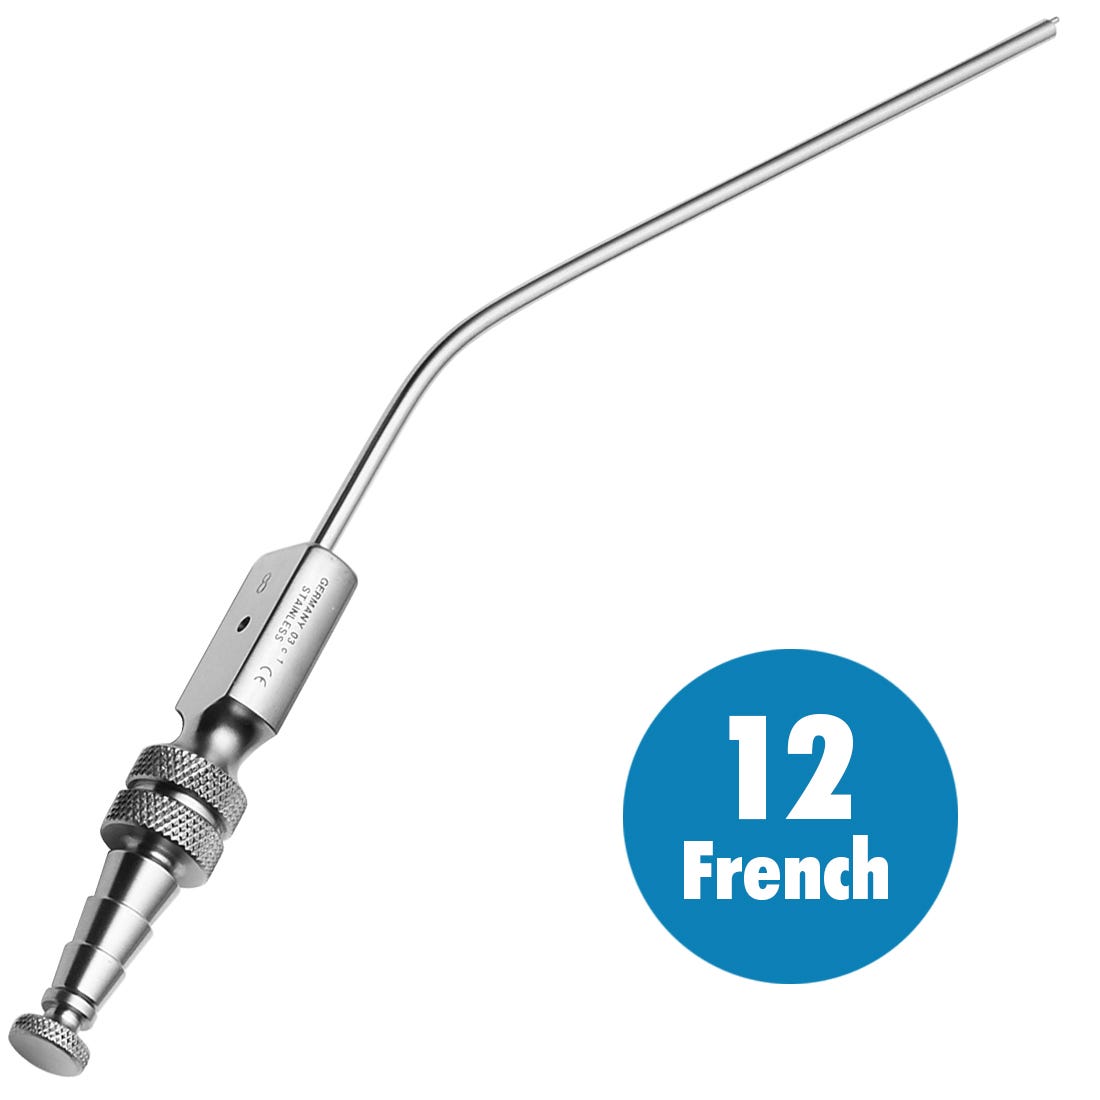 Frazier Suction Tip, 12 French, approx 4mm opening, 30 degree angle, delicate tip